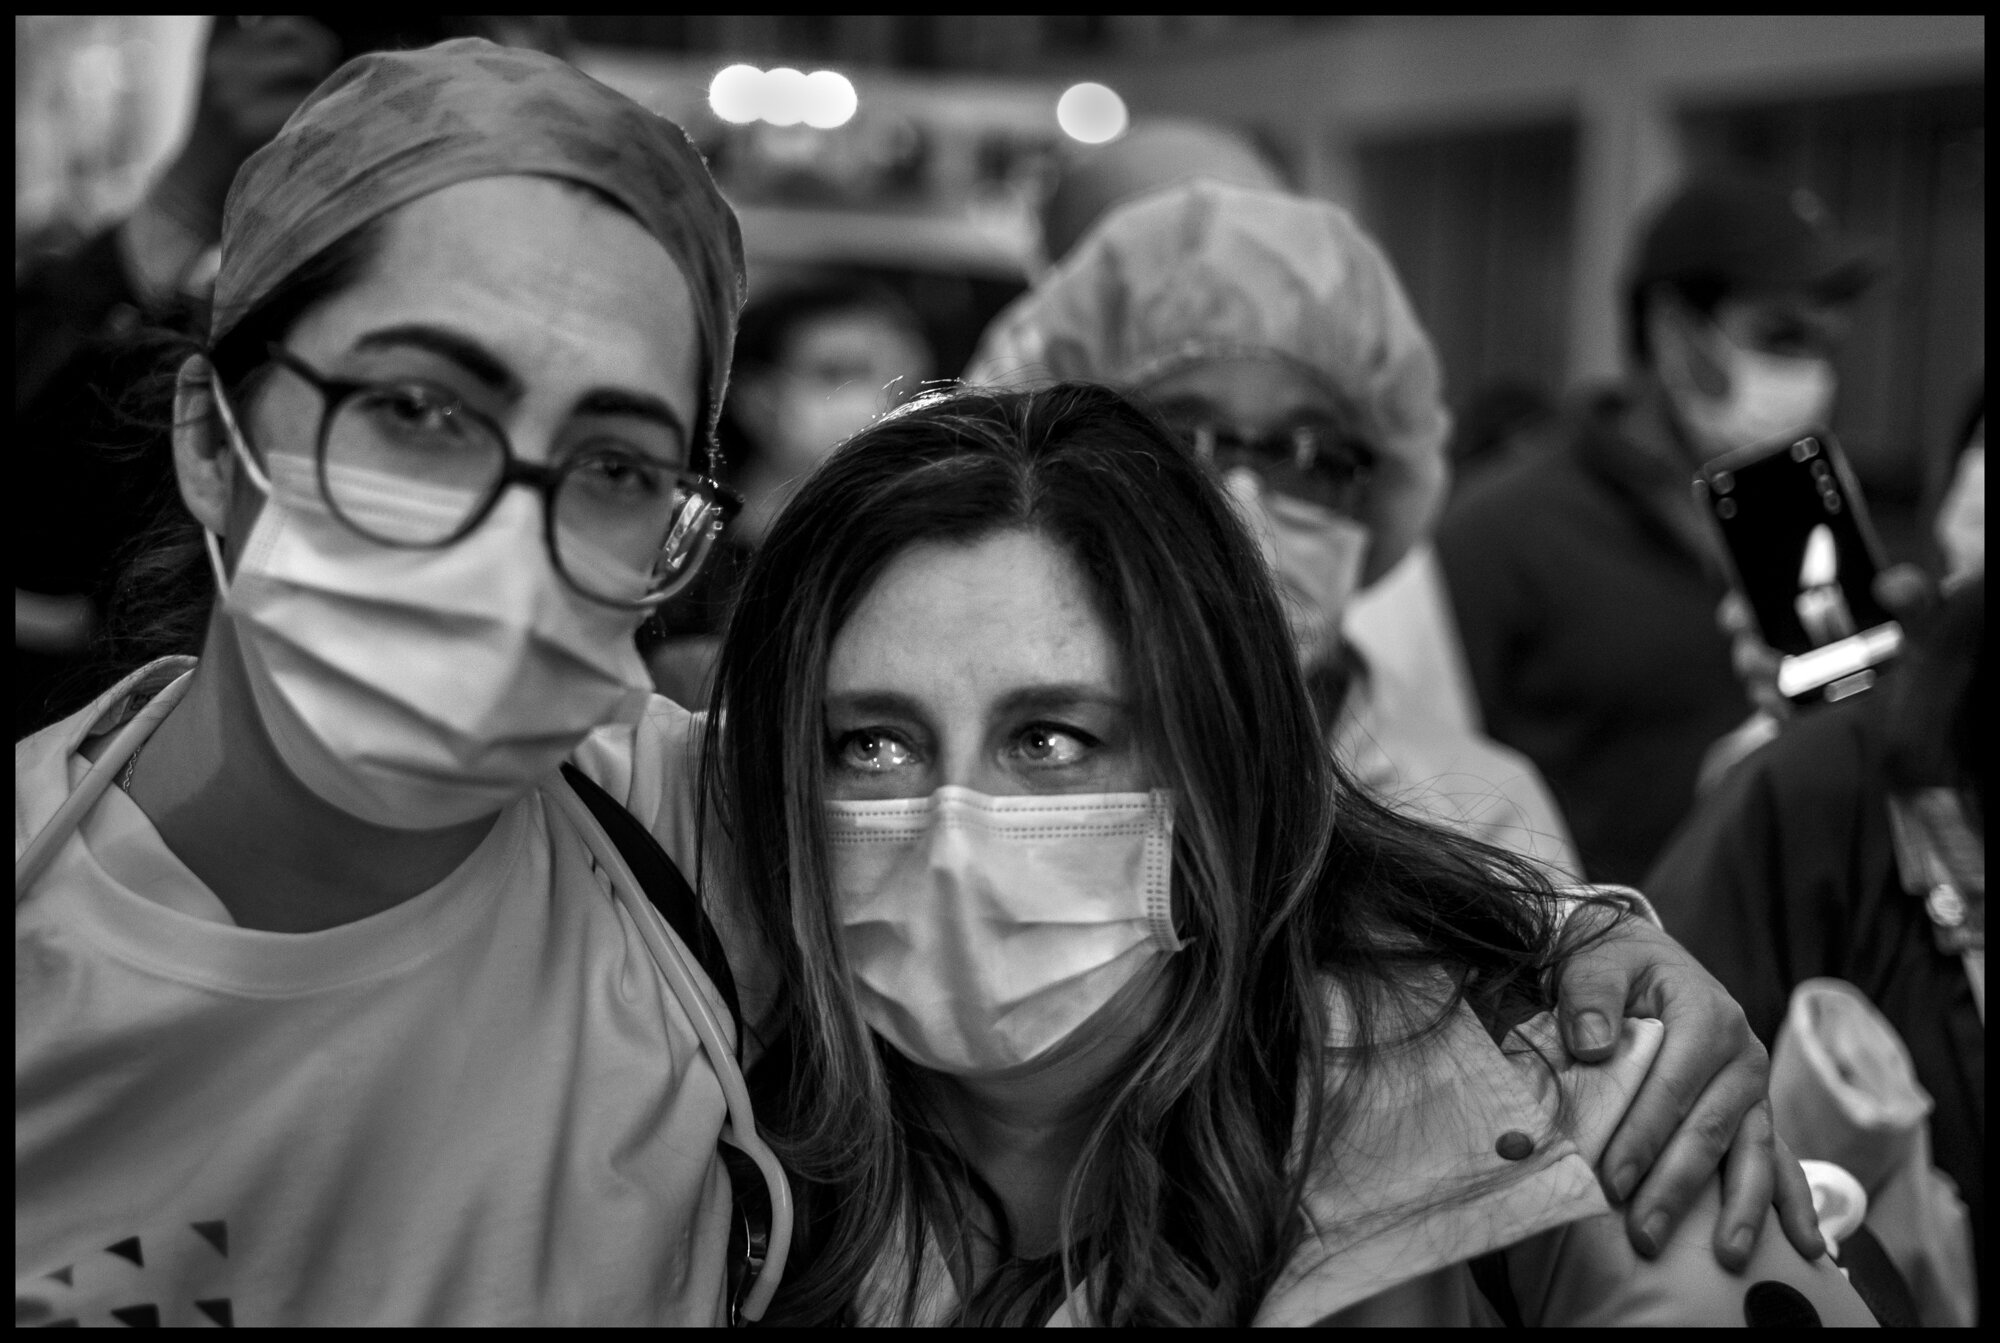  Frontline workers from Lenox Hill Hospital, New York, hold vigil to honor all victims of COVID-19.  May 20, 2020. © Peter Turnley.   ID# 51-002 